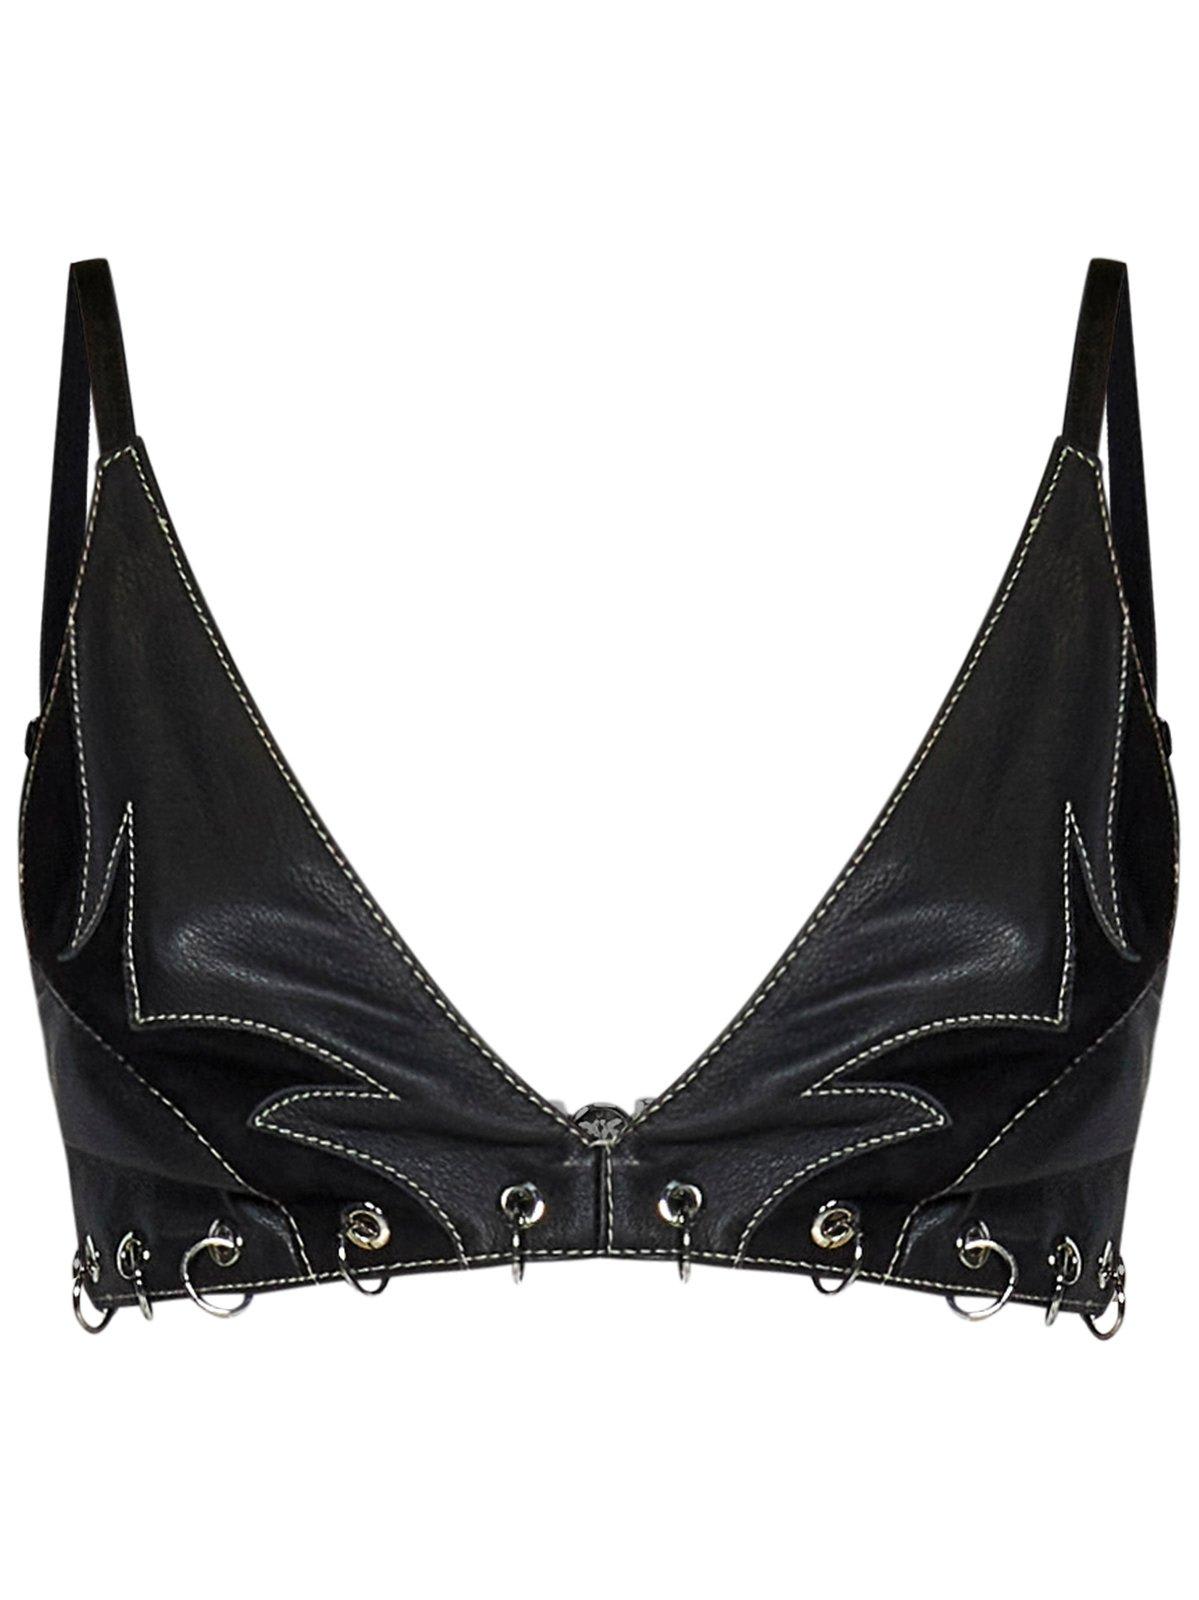 Rings-detailed Leather Cropped Bralette Top